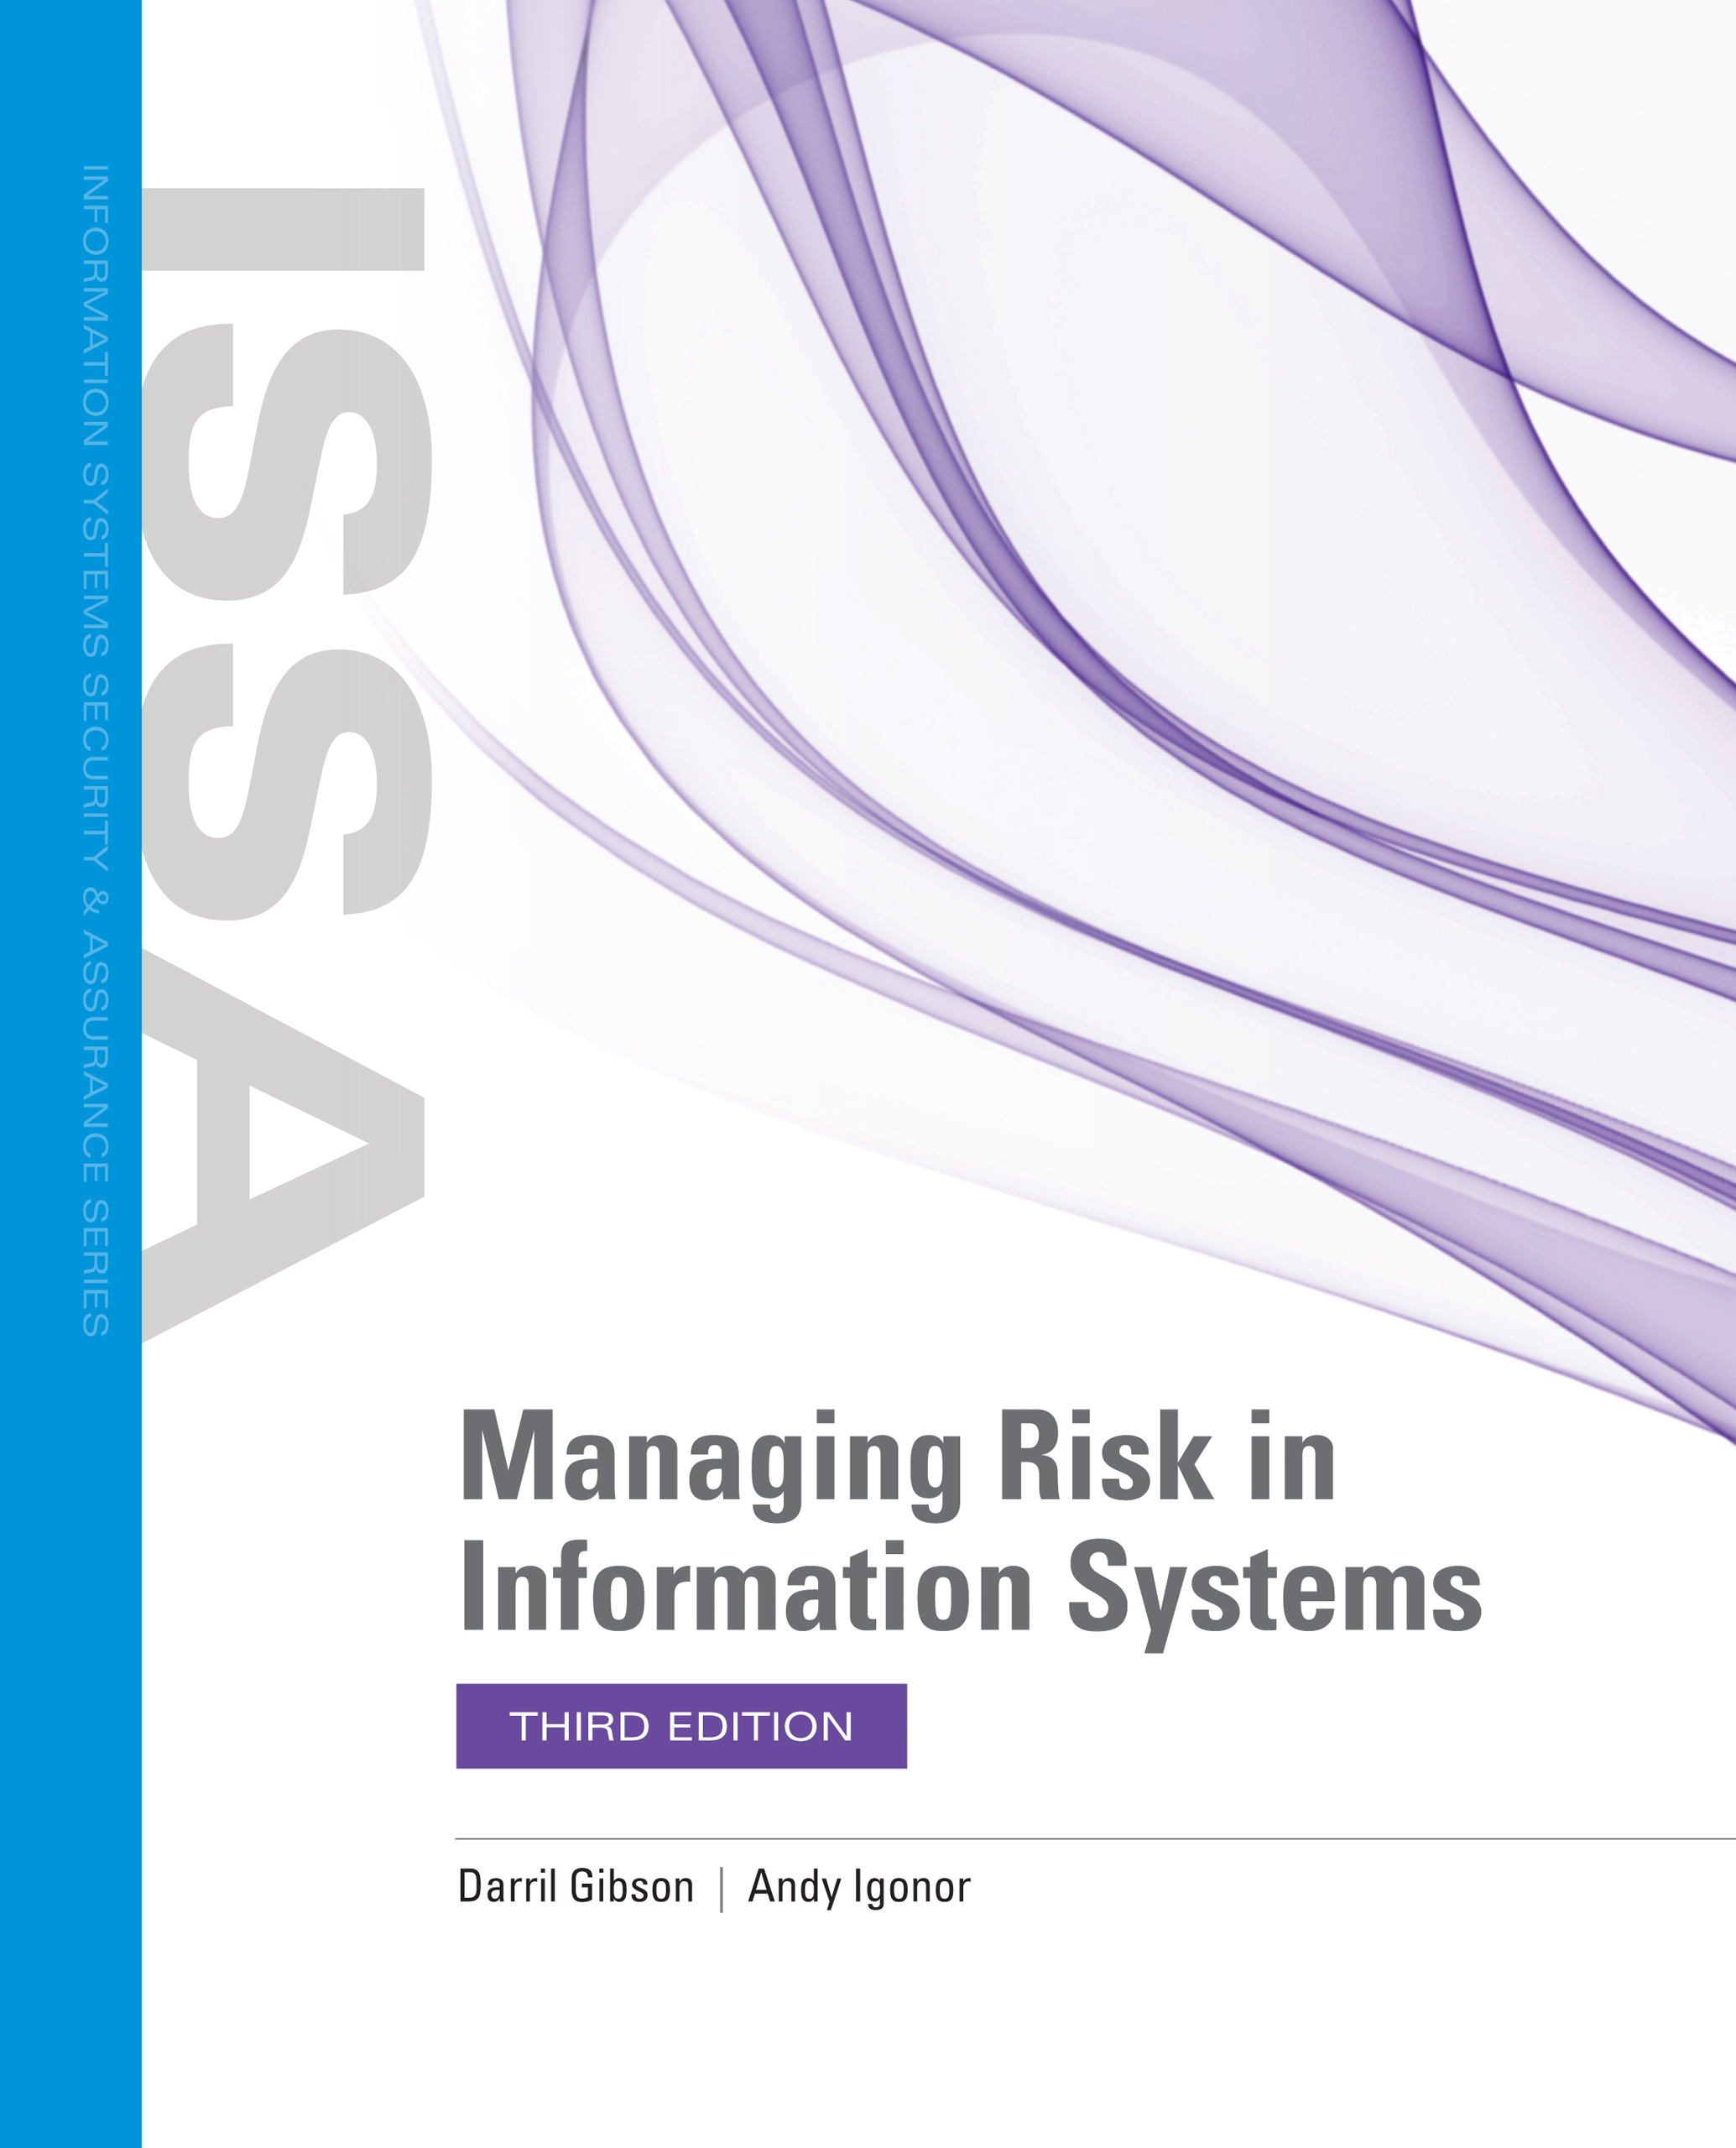 Cover: Managing Risk in Information Systems by Darril Gibson and Andy Igonor